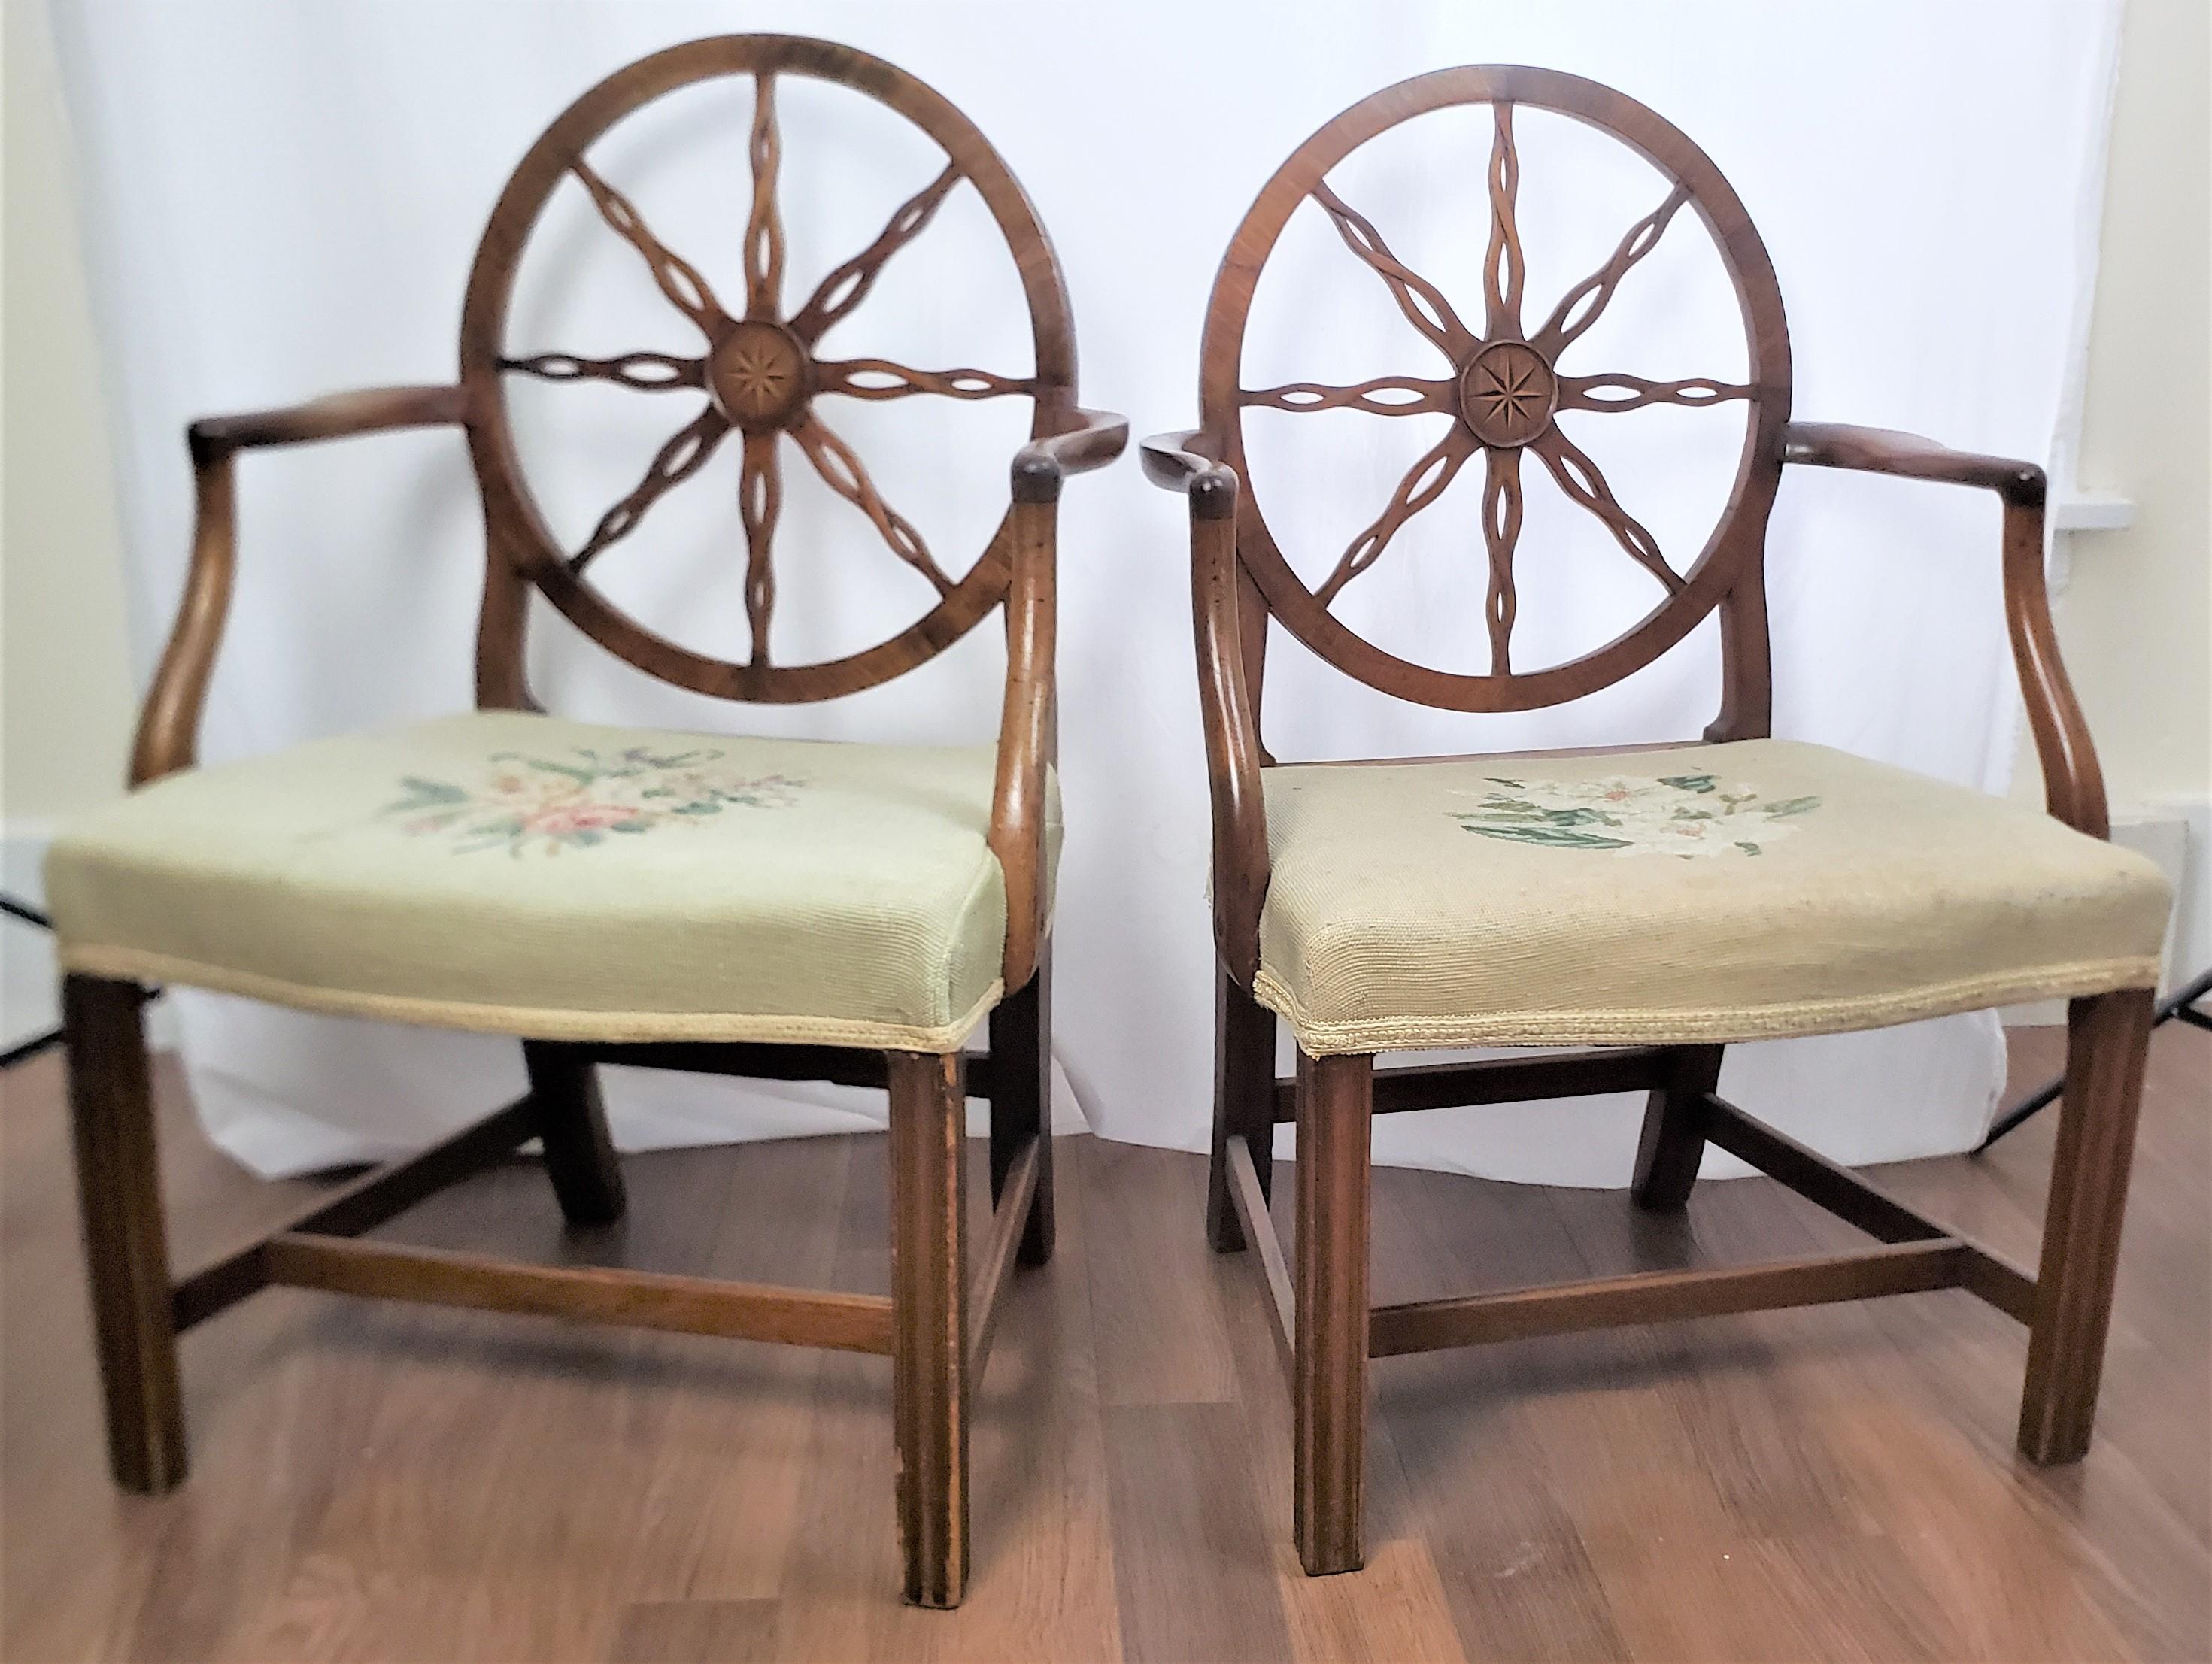 Pair of Antique King George III Period Wheelback Armchair or Side Chair Frames For Sale 4